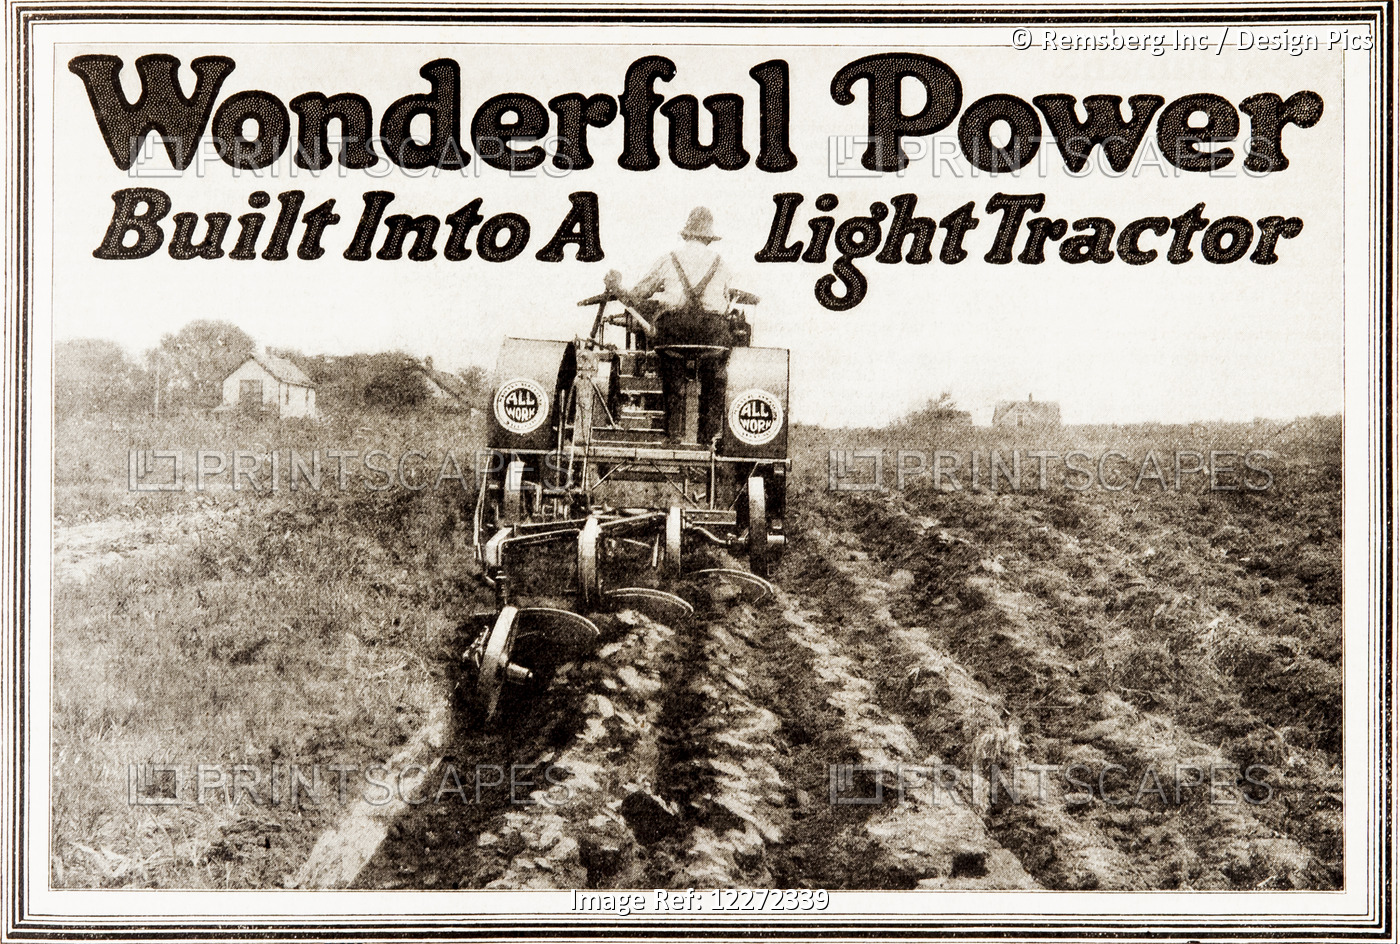 Historic Tractor Advertisement From Early 20th Century.